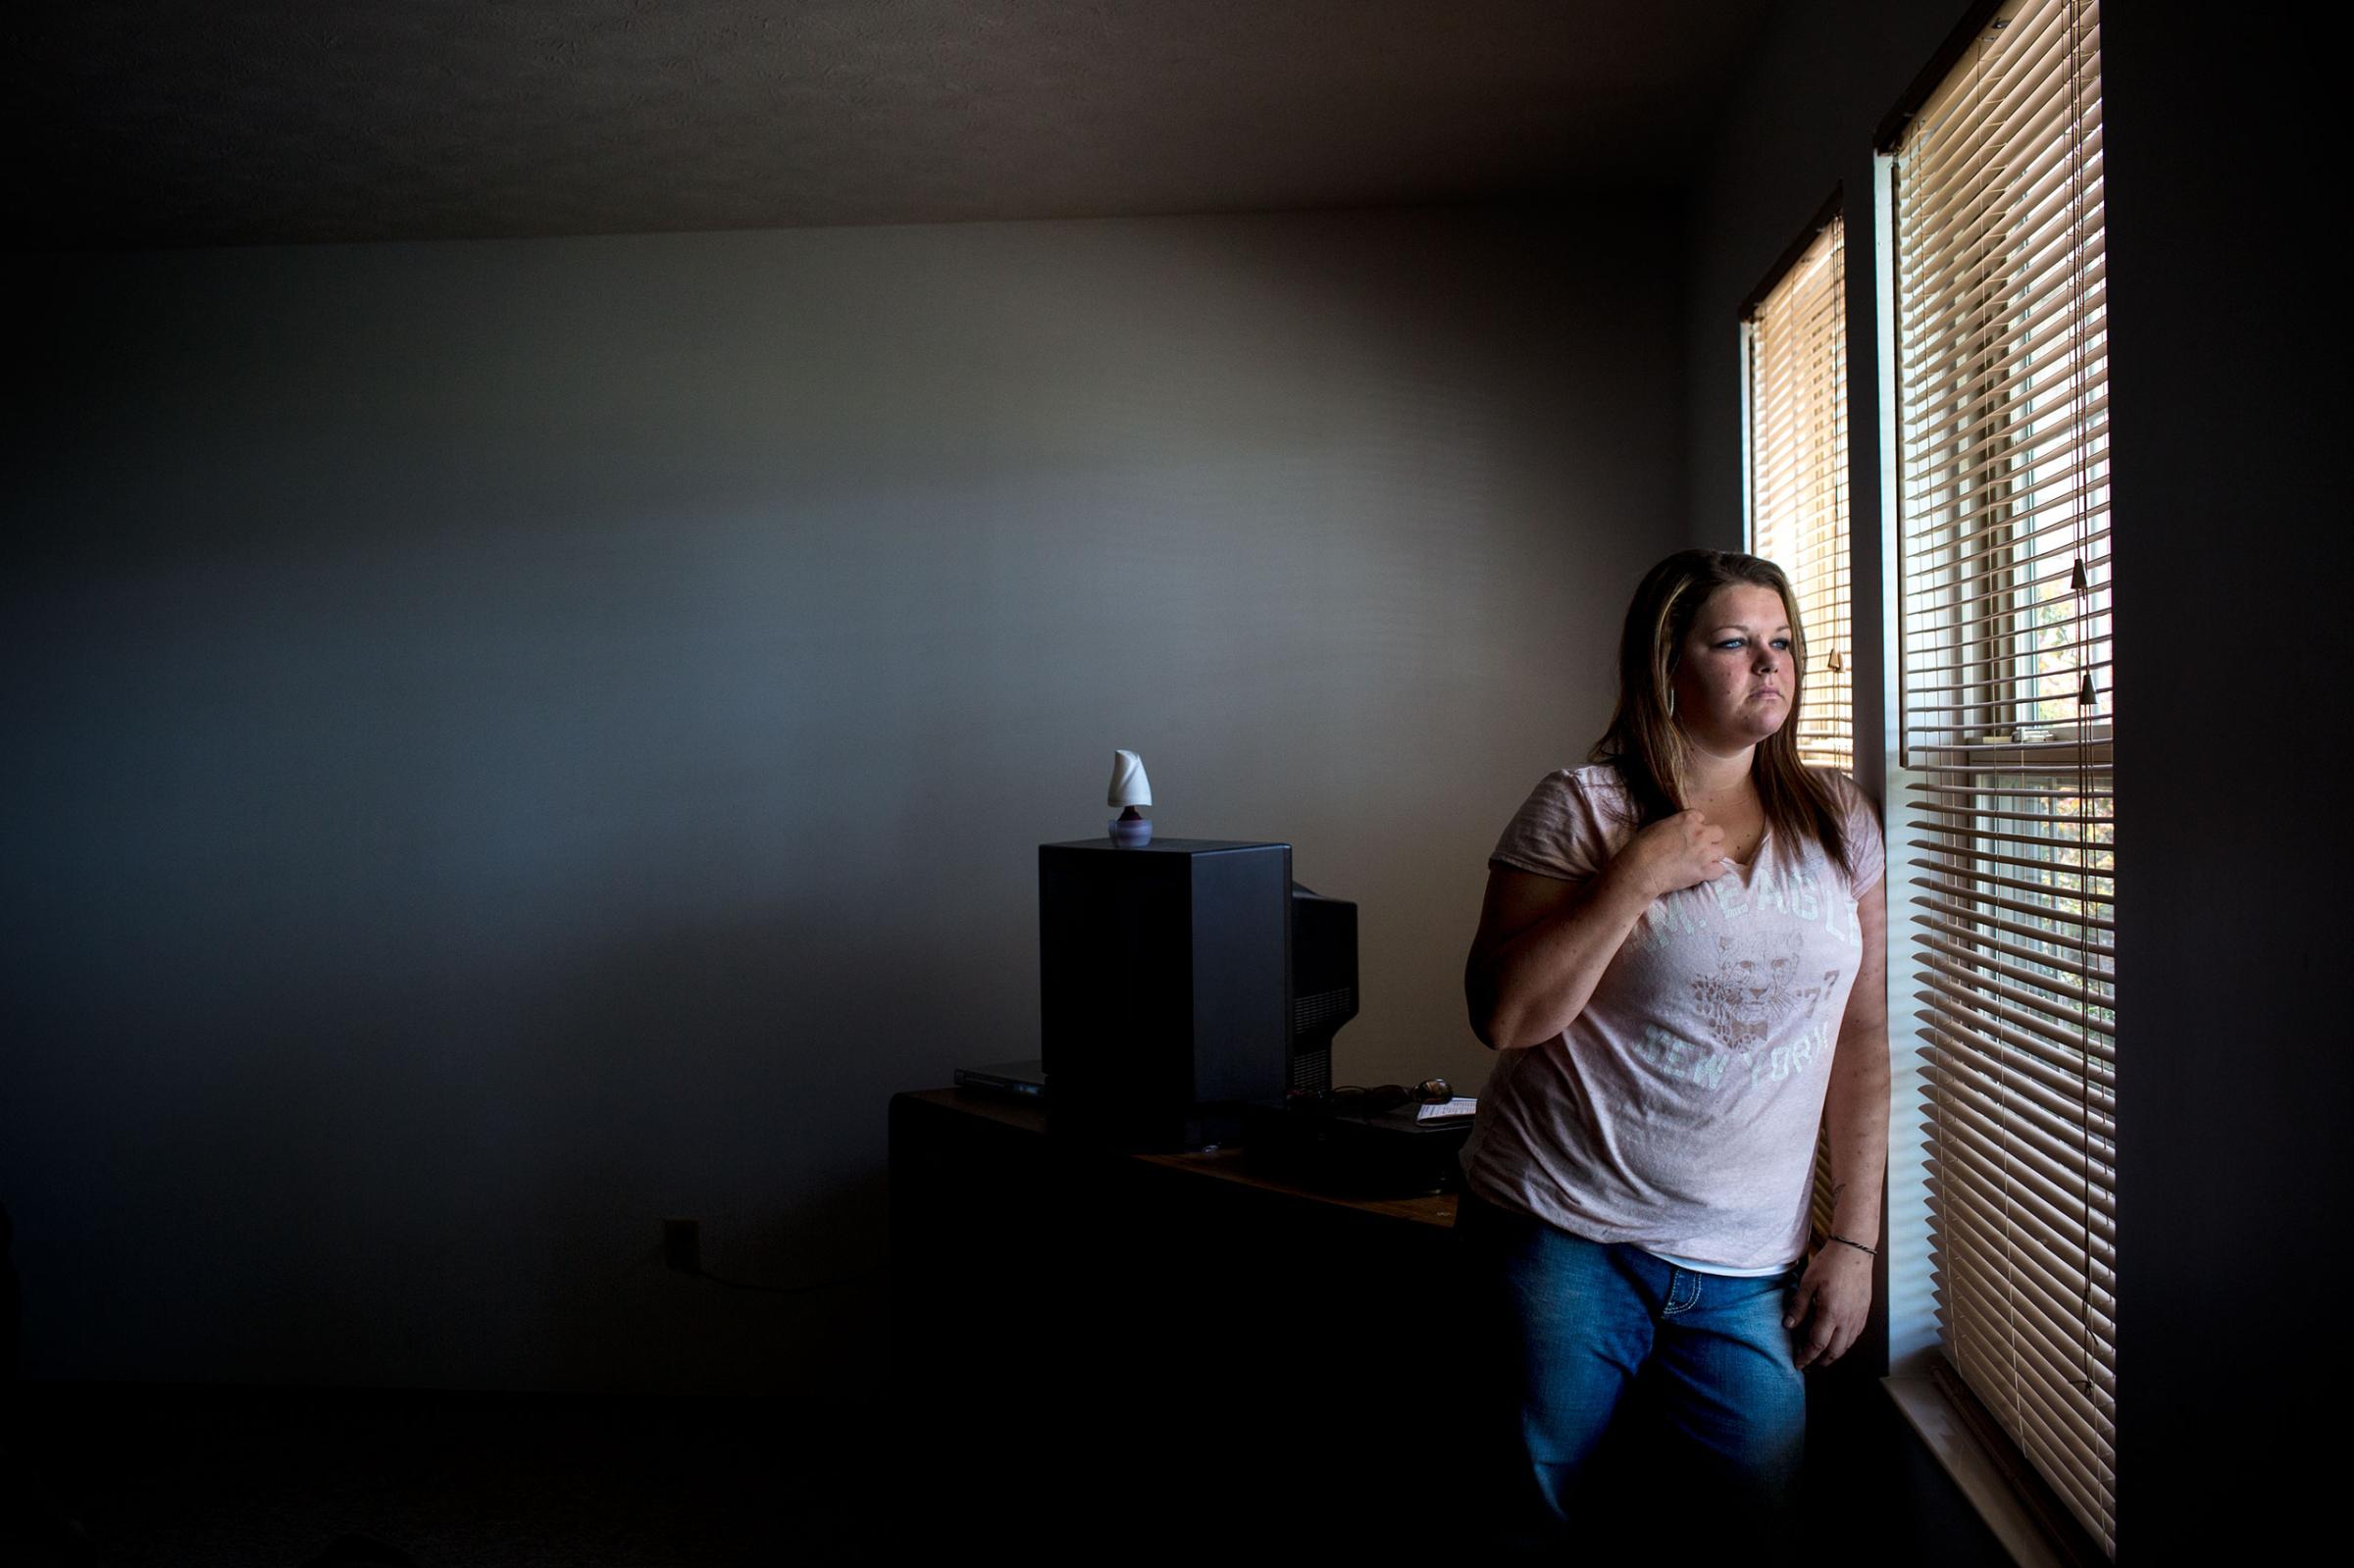 May 23, 2015, Austin, Indiana. Tiffany Turner poses for a portrait at her home. Tiffany Turner became addicted to Opana after the death of her husband and a long time pain killer problem. After losing custody of her children she quit drugs a month ago, and is now volunteering at the needle exchange and fighting to regain custody of her kids. Austin, Indiana has recently been rocked by the diagnosis of over 160 HIV cases in the small community. The majority of these cases have been found in users of Opana, a prescription pain killer which can be abused intravenously and is considered highly addictive. The city has recently opened a needle exchange program to provide clean syringes to the drug users and help to contain the outbreak. (Natalie Keyssar)